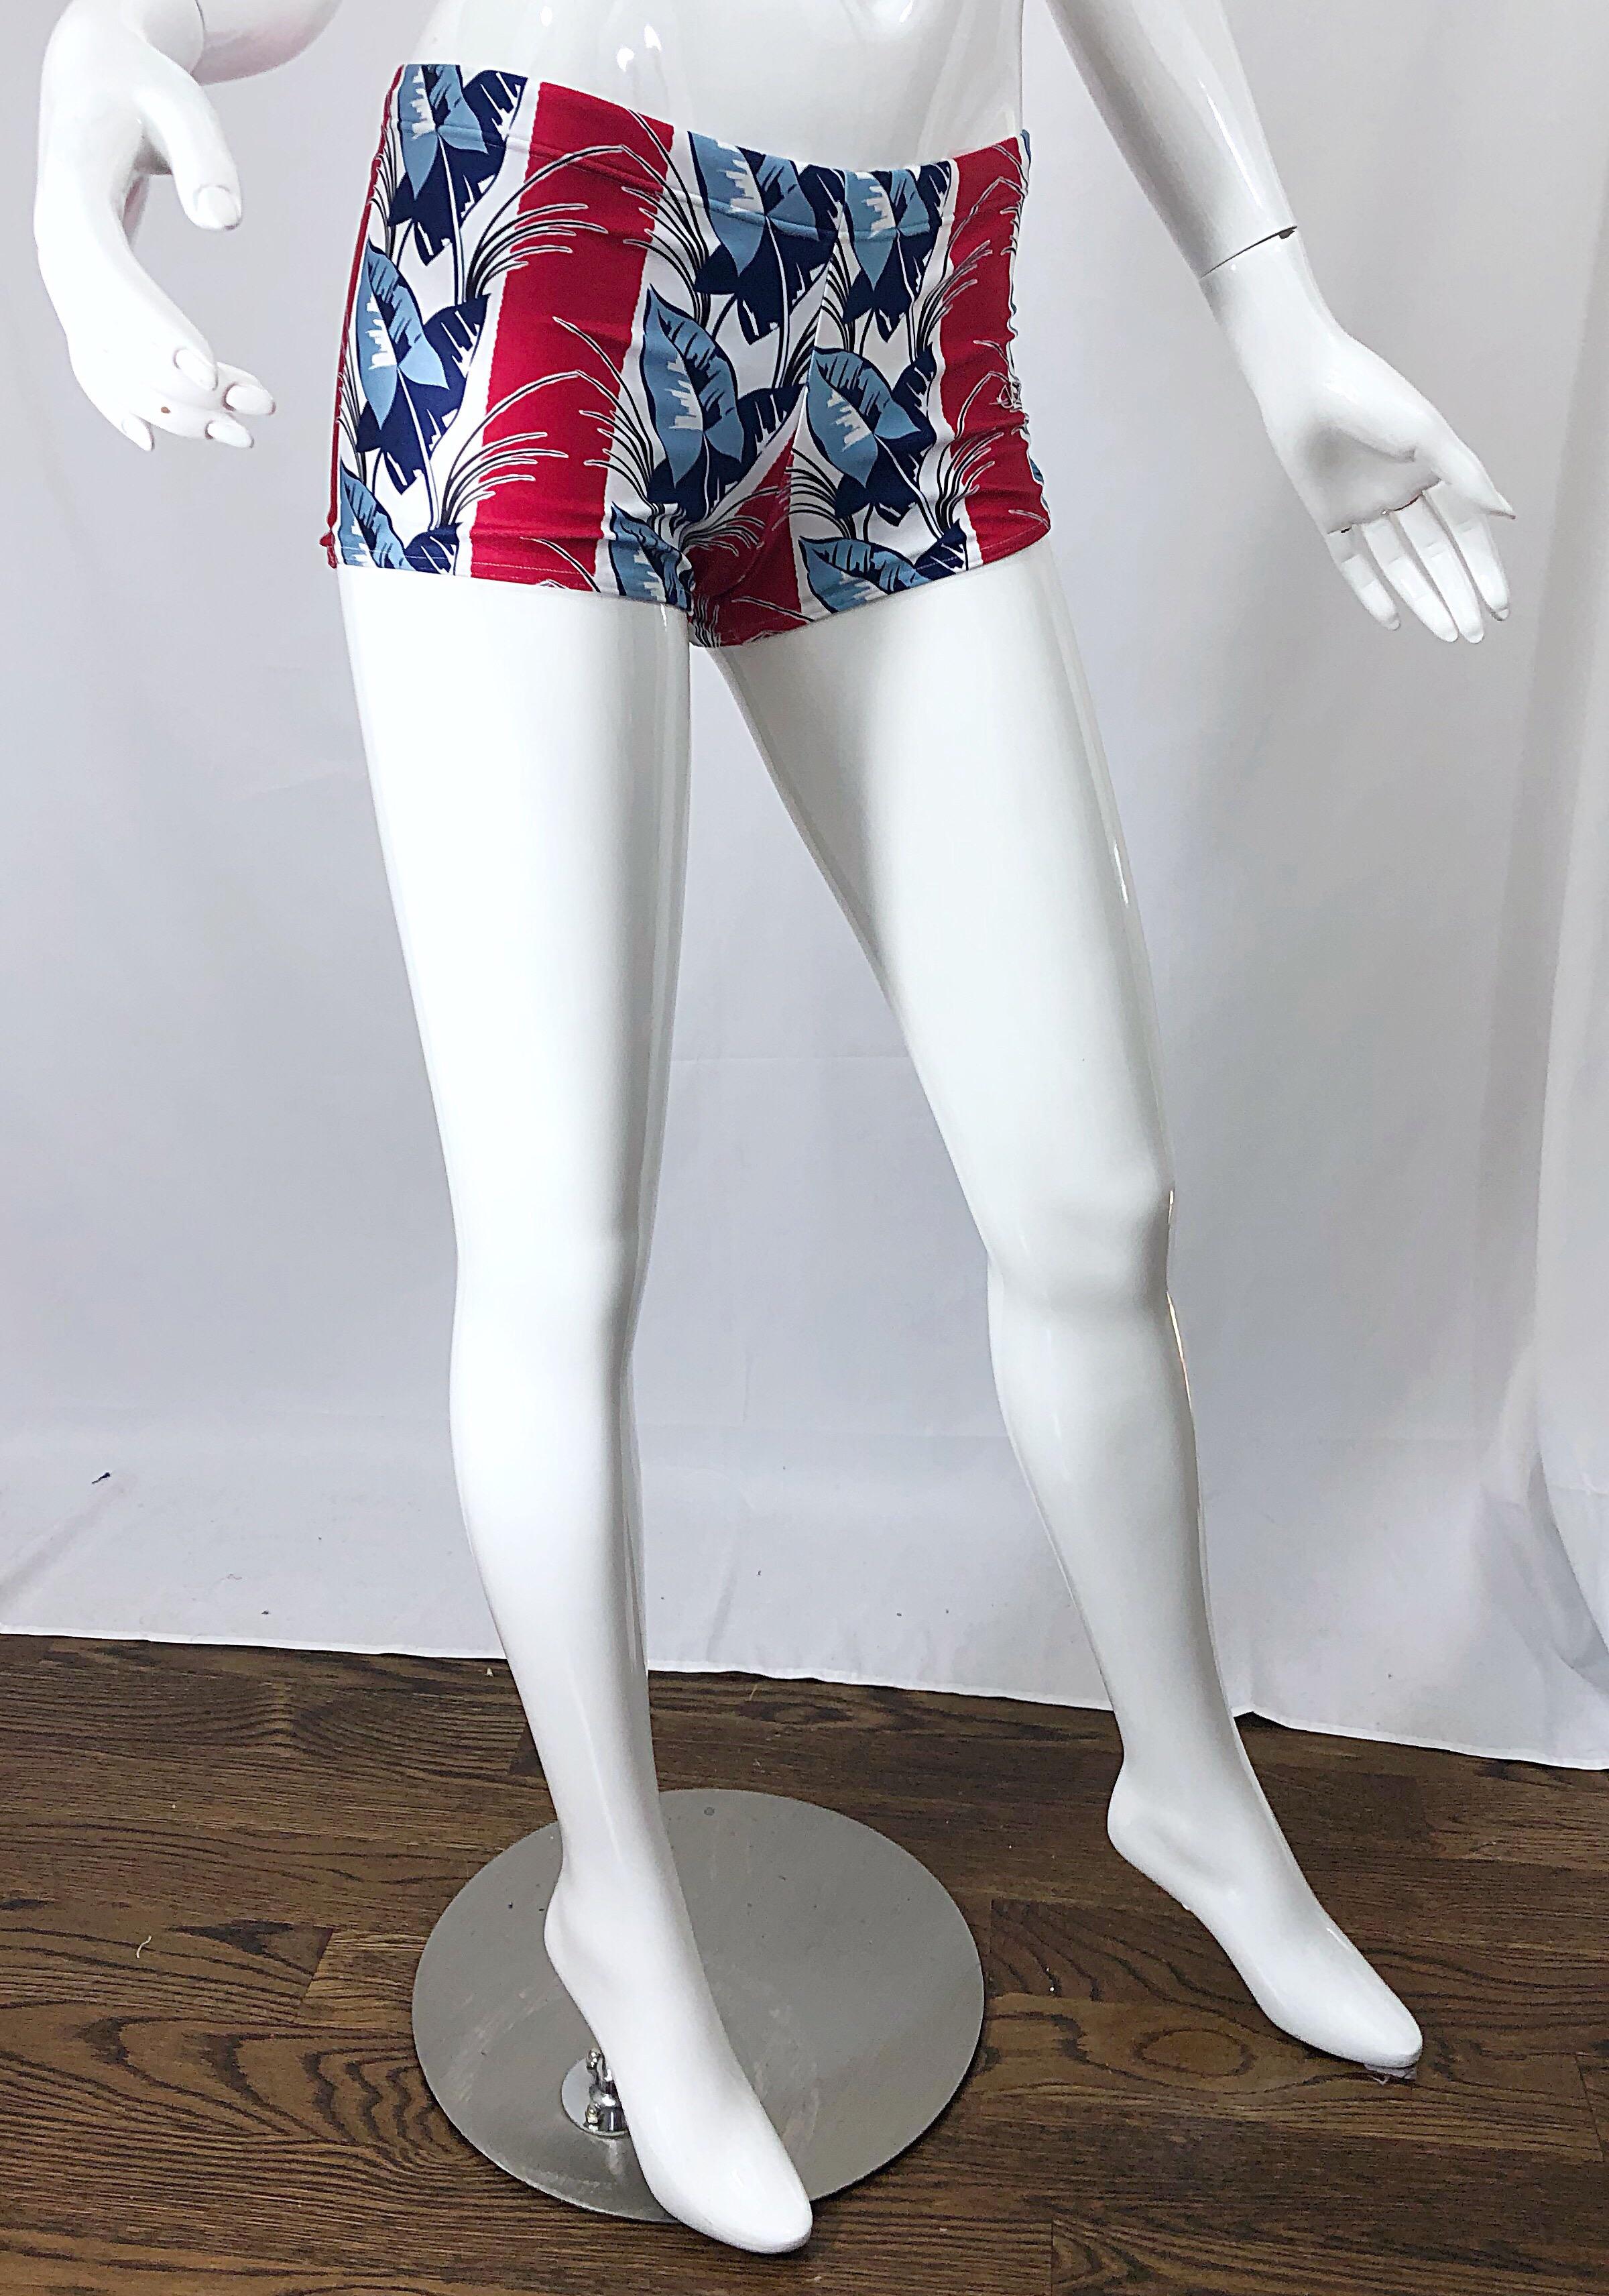 Valentino New 2000s Women's Red, White and Blue Boy Shorts Swimsuit Bottoms For Sale 7